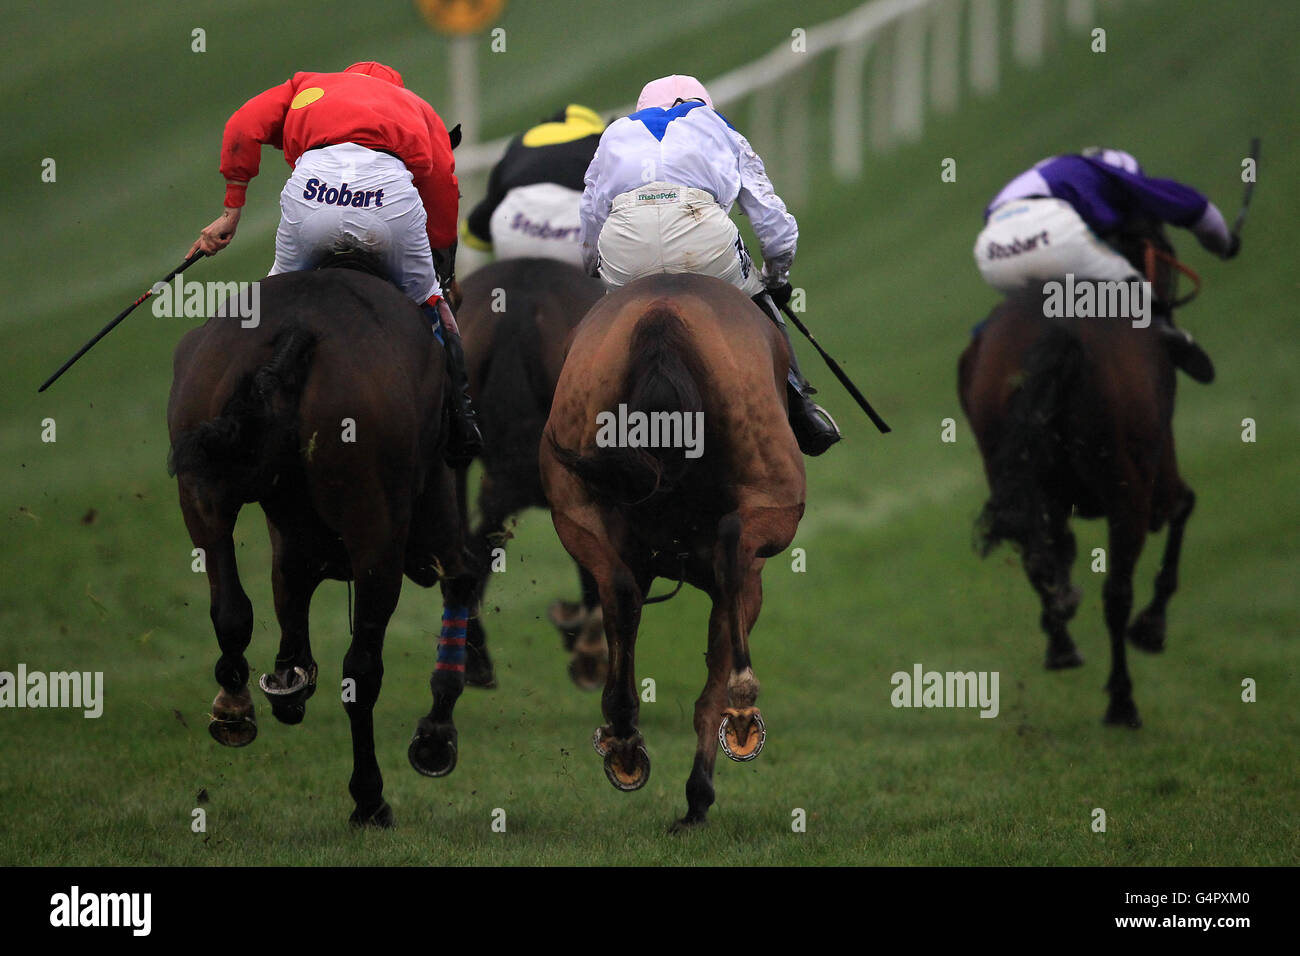 Detailed view of the back of a group of jockeys with Stobart advertising on their trousers as they run away from camera Stock Photo